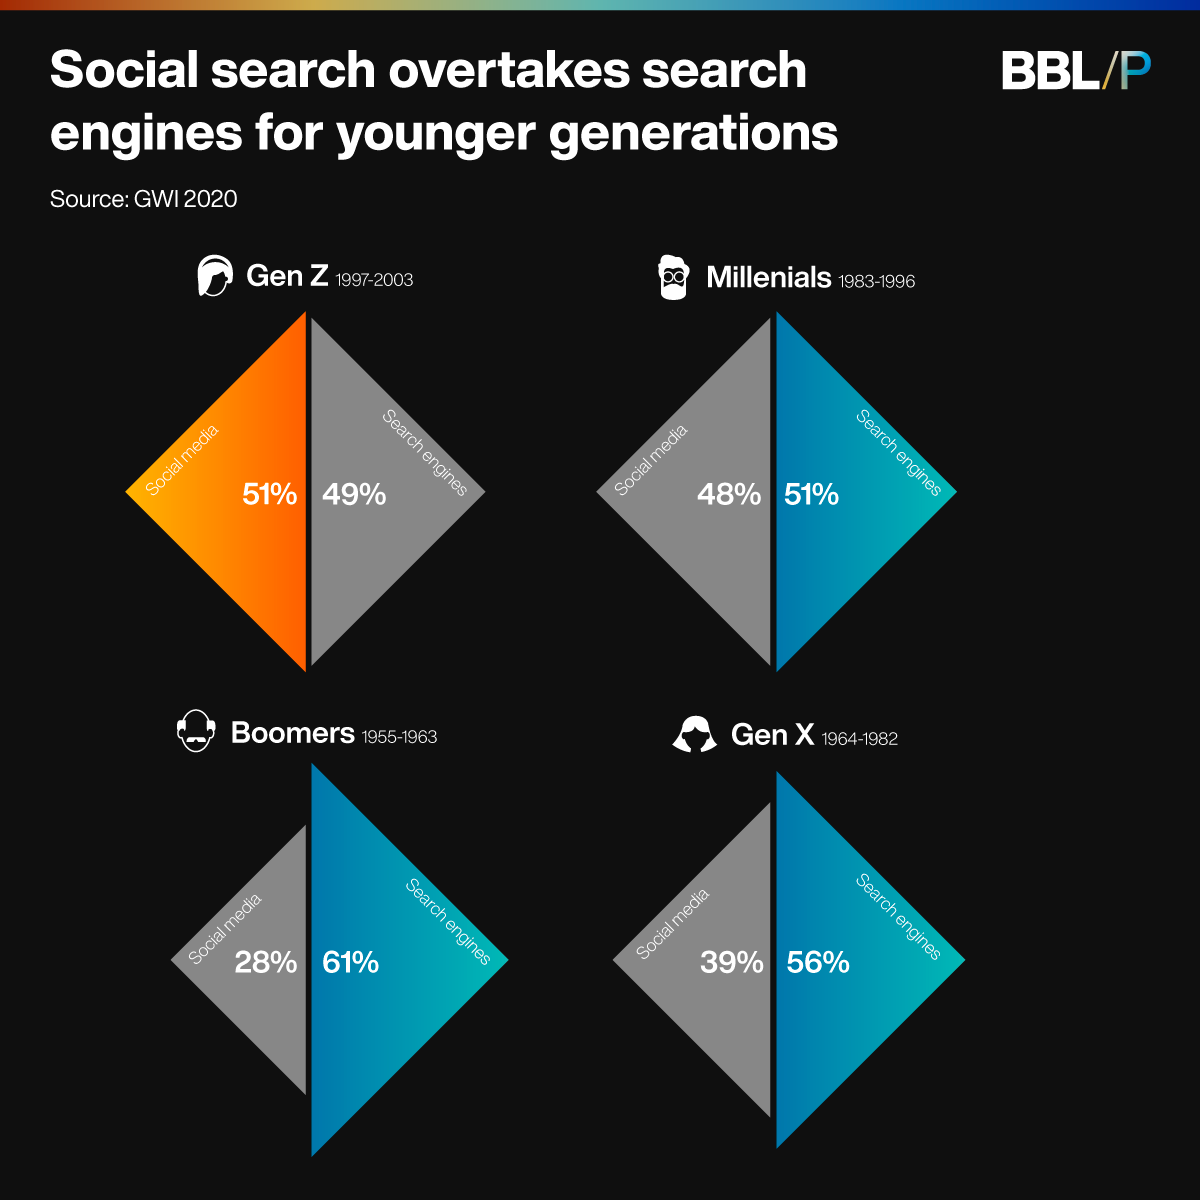 Social search overtakes search engines